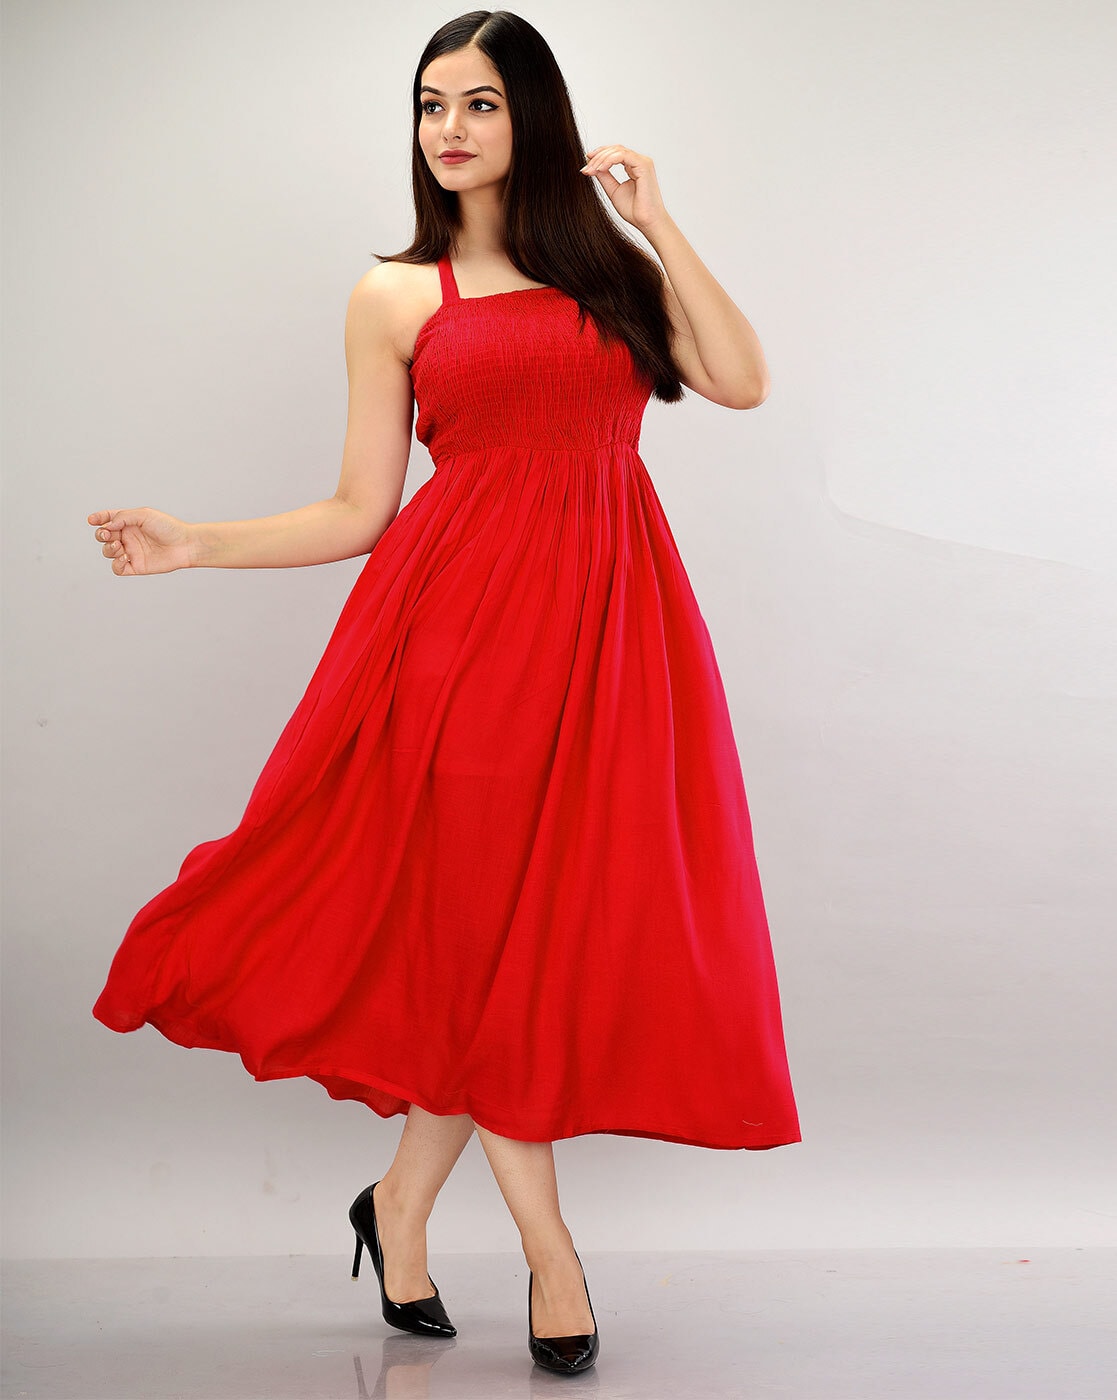 Vee Dress in Red and Beige (Size L, XL) - One piece available – ILAMRA